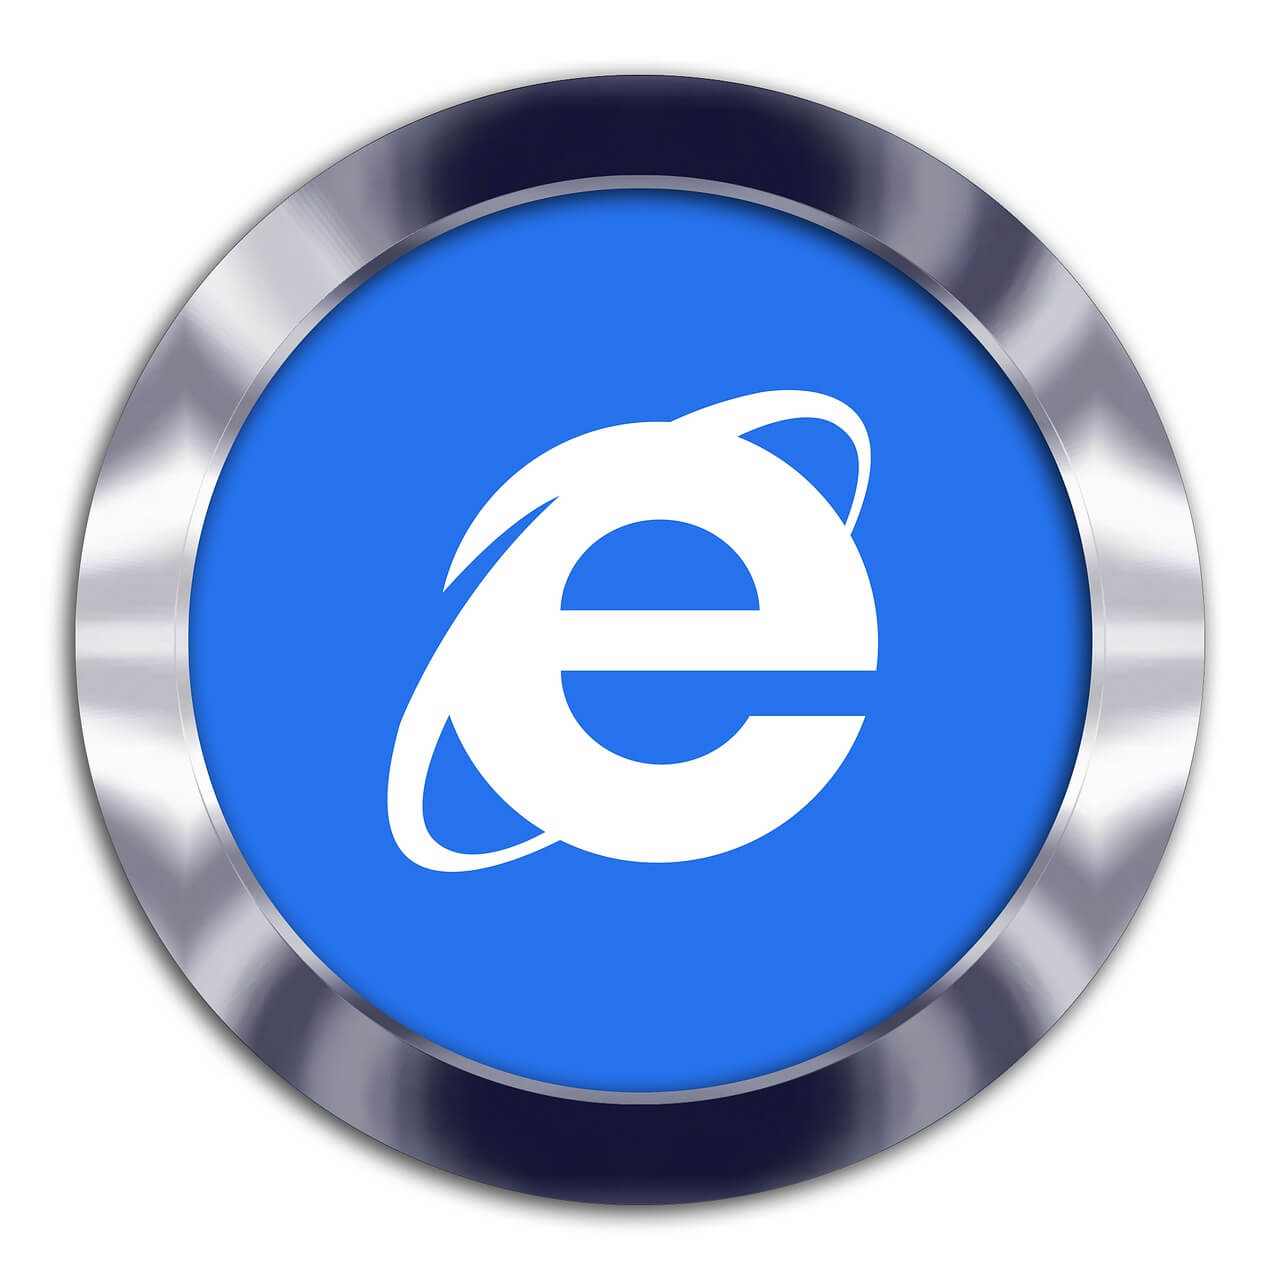 Microsoft Edge browser may support Linux